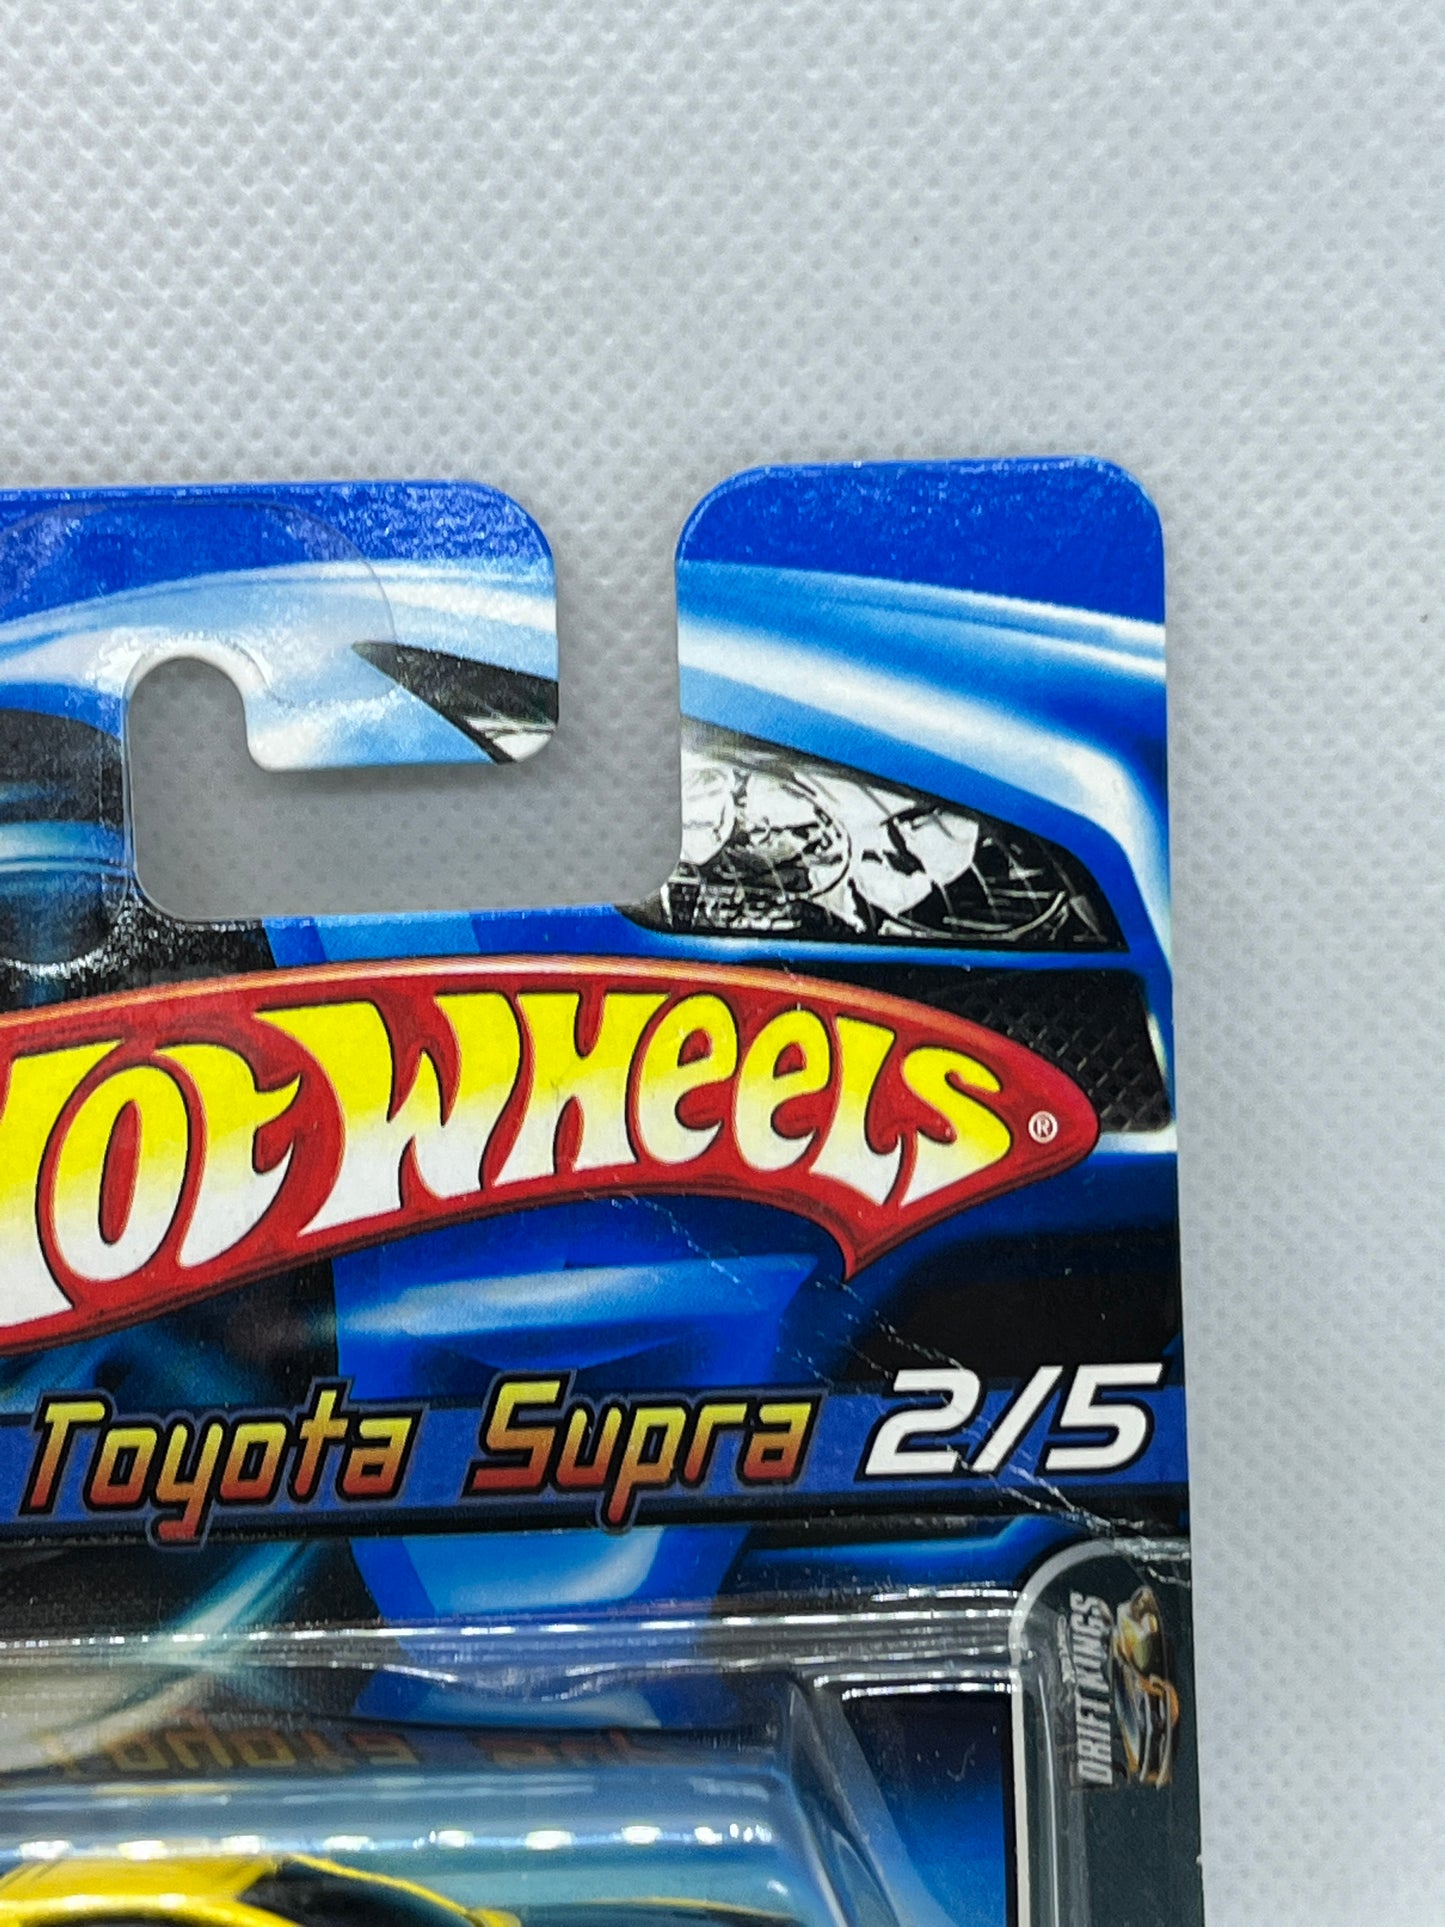 2006 Hot Wheels Tooned Toyota Supra Yellow Short Card NIP With Protector